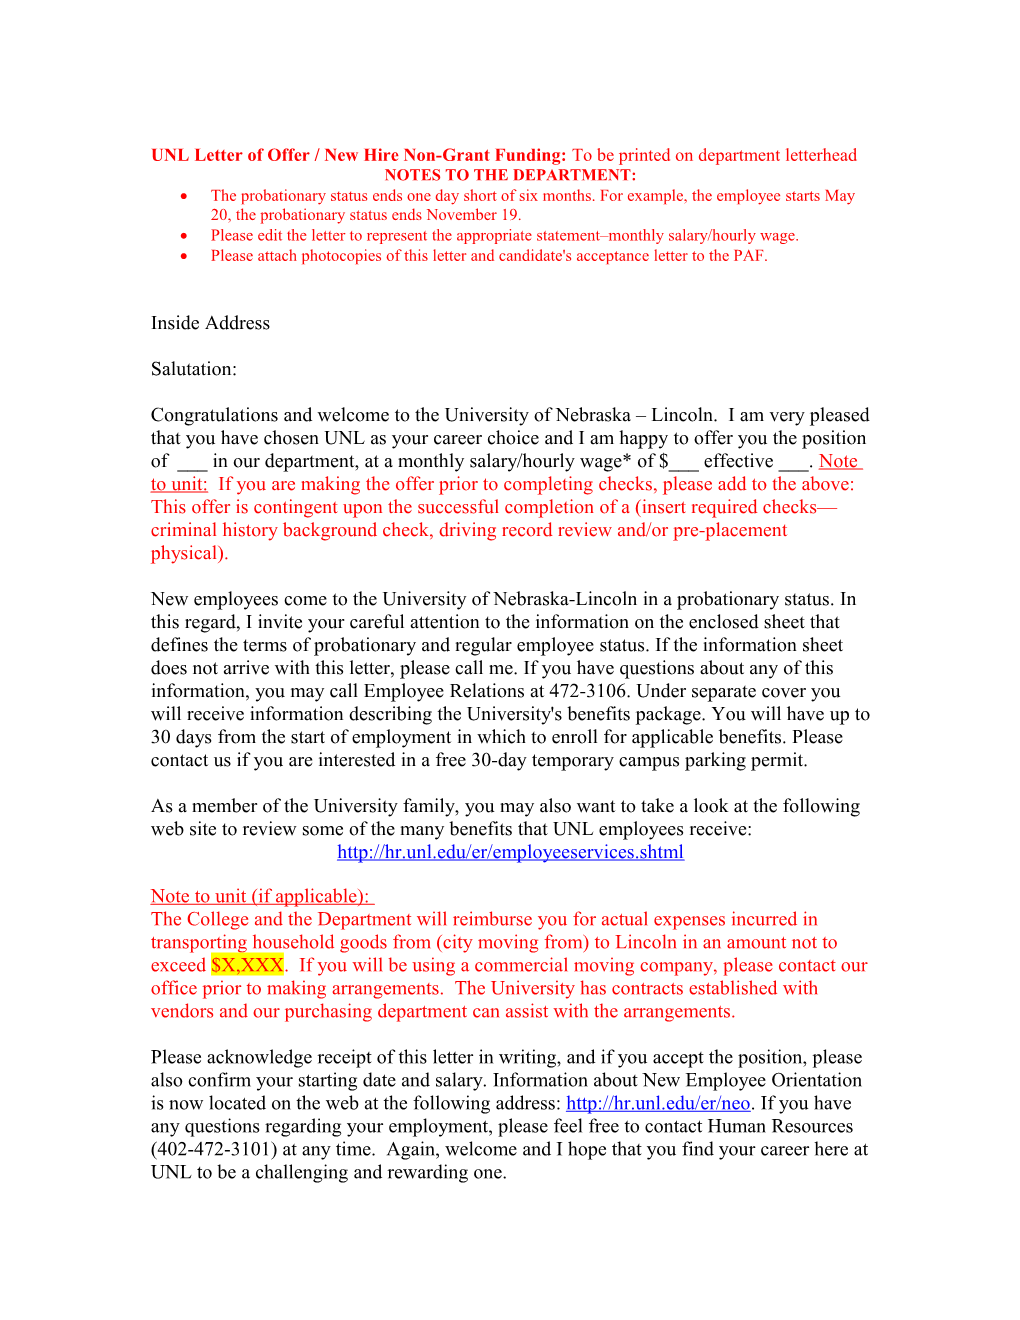 UNL Letter of Offer / New Hire Non-Grant Funding: to Be Printed on Department Letterhead